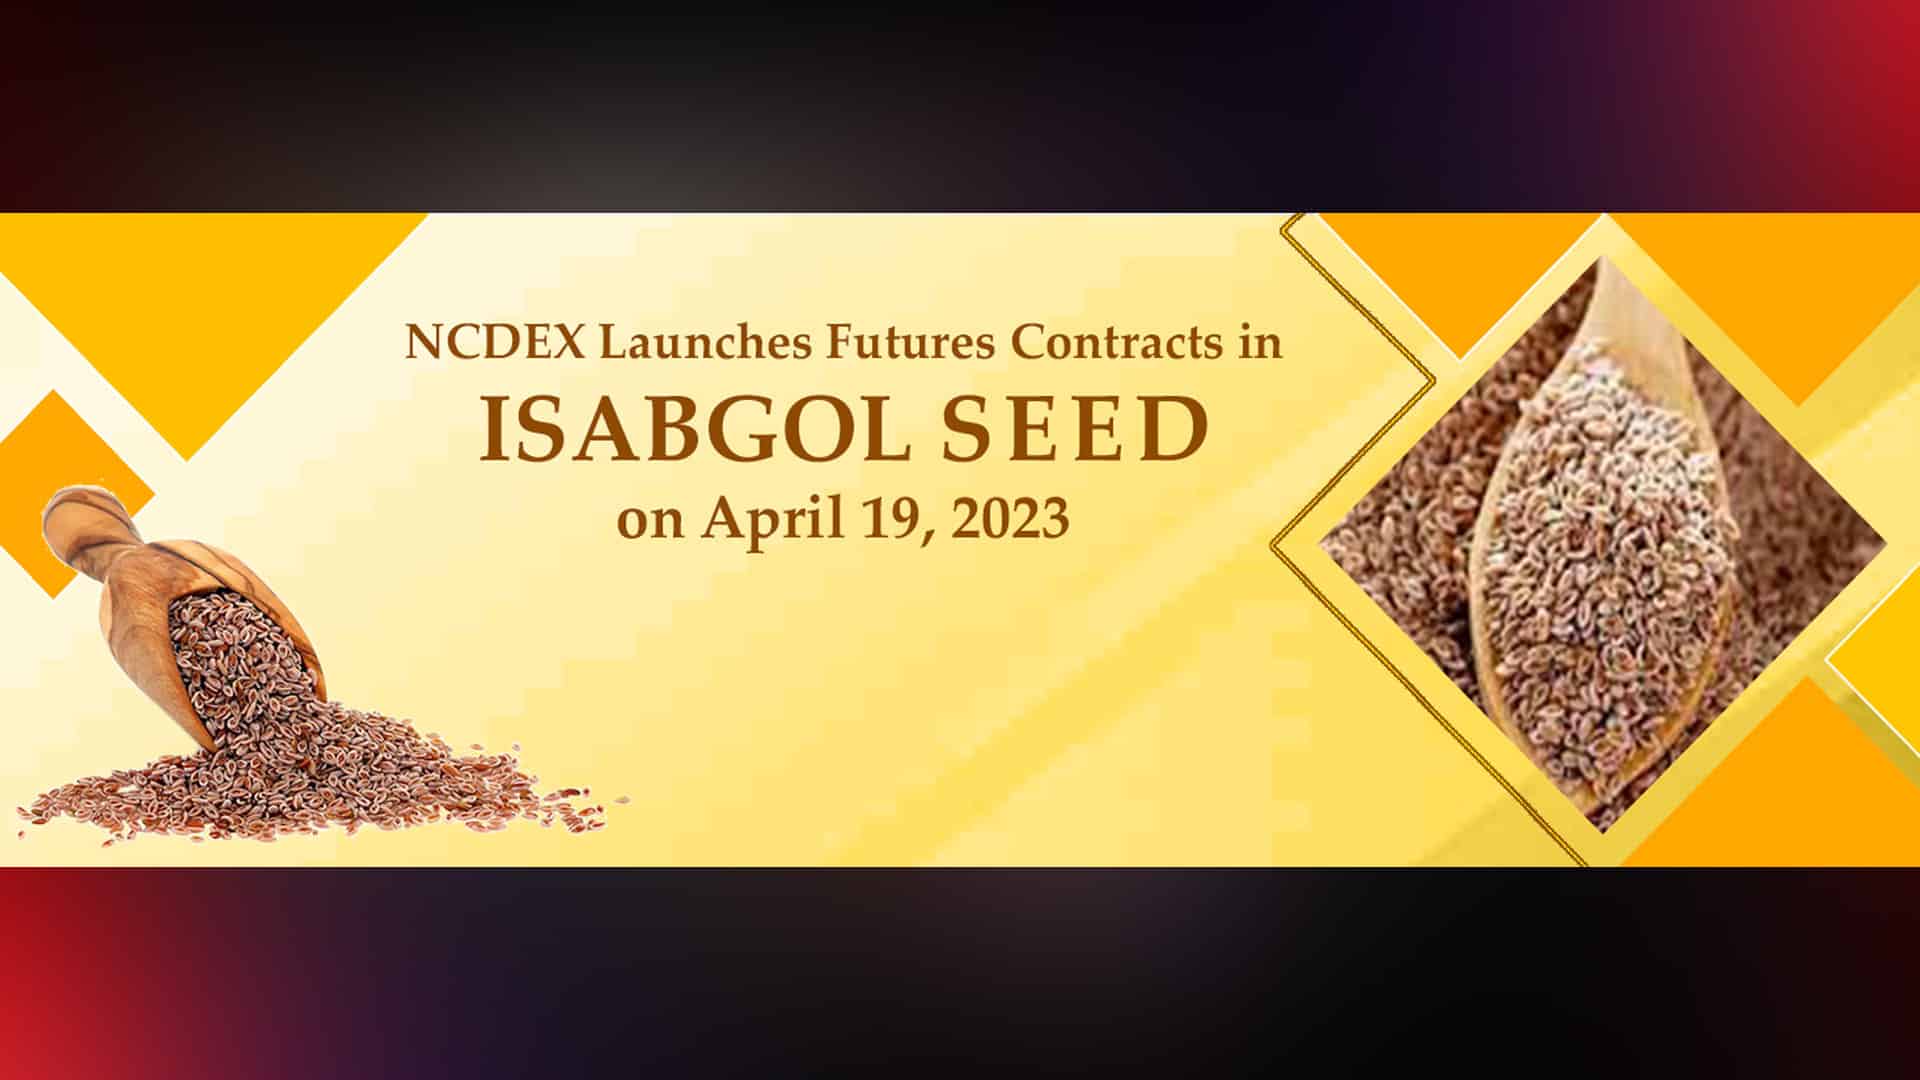 NCDEX launches Isabgol Seed futures contract